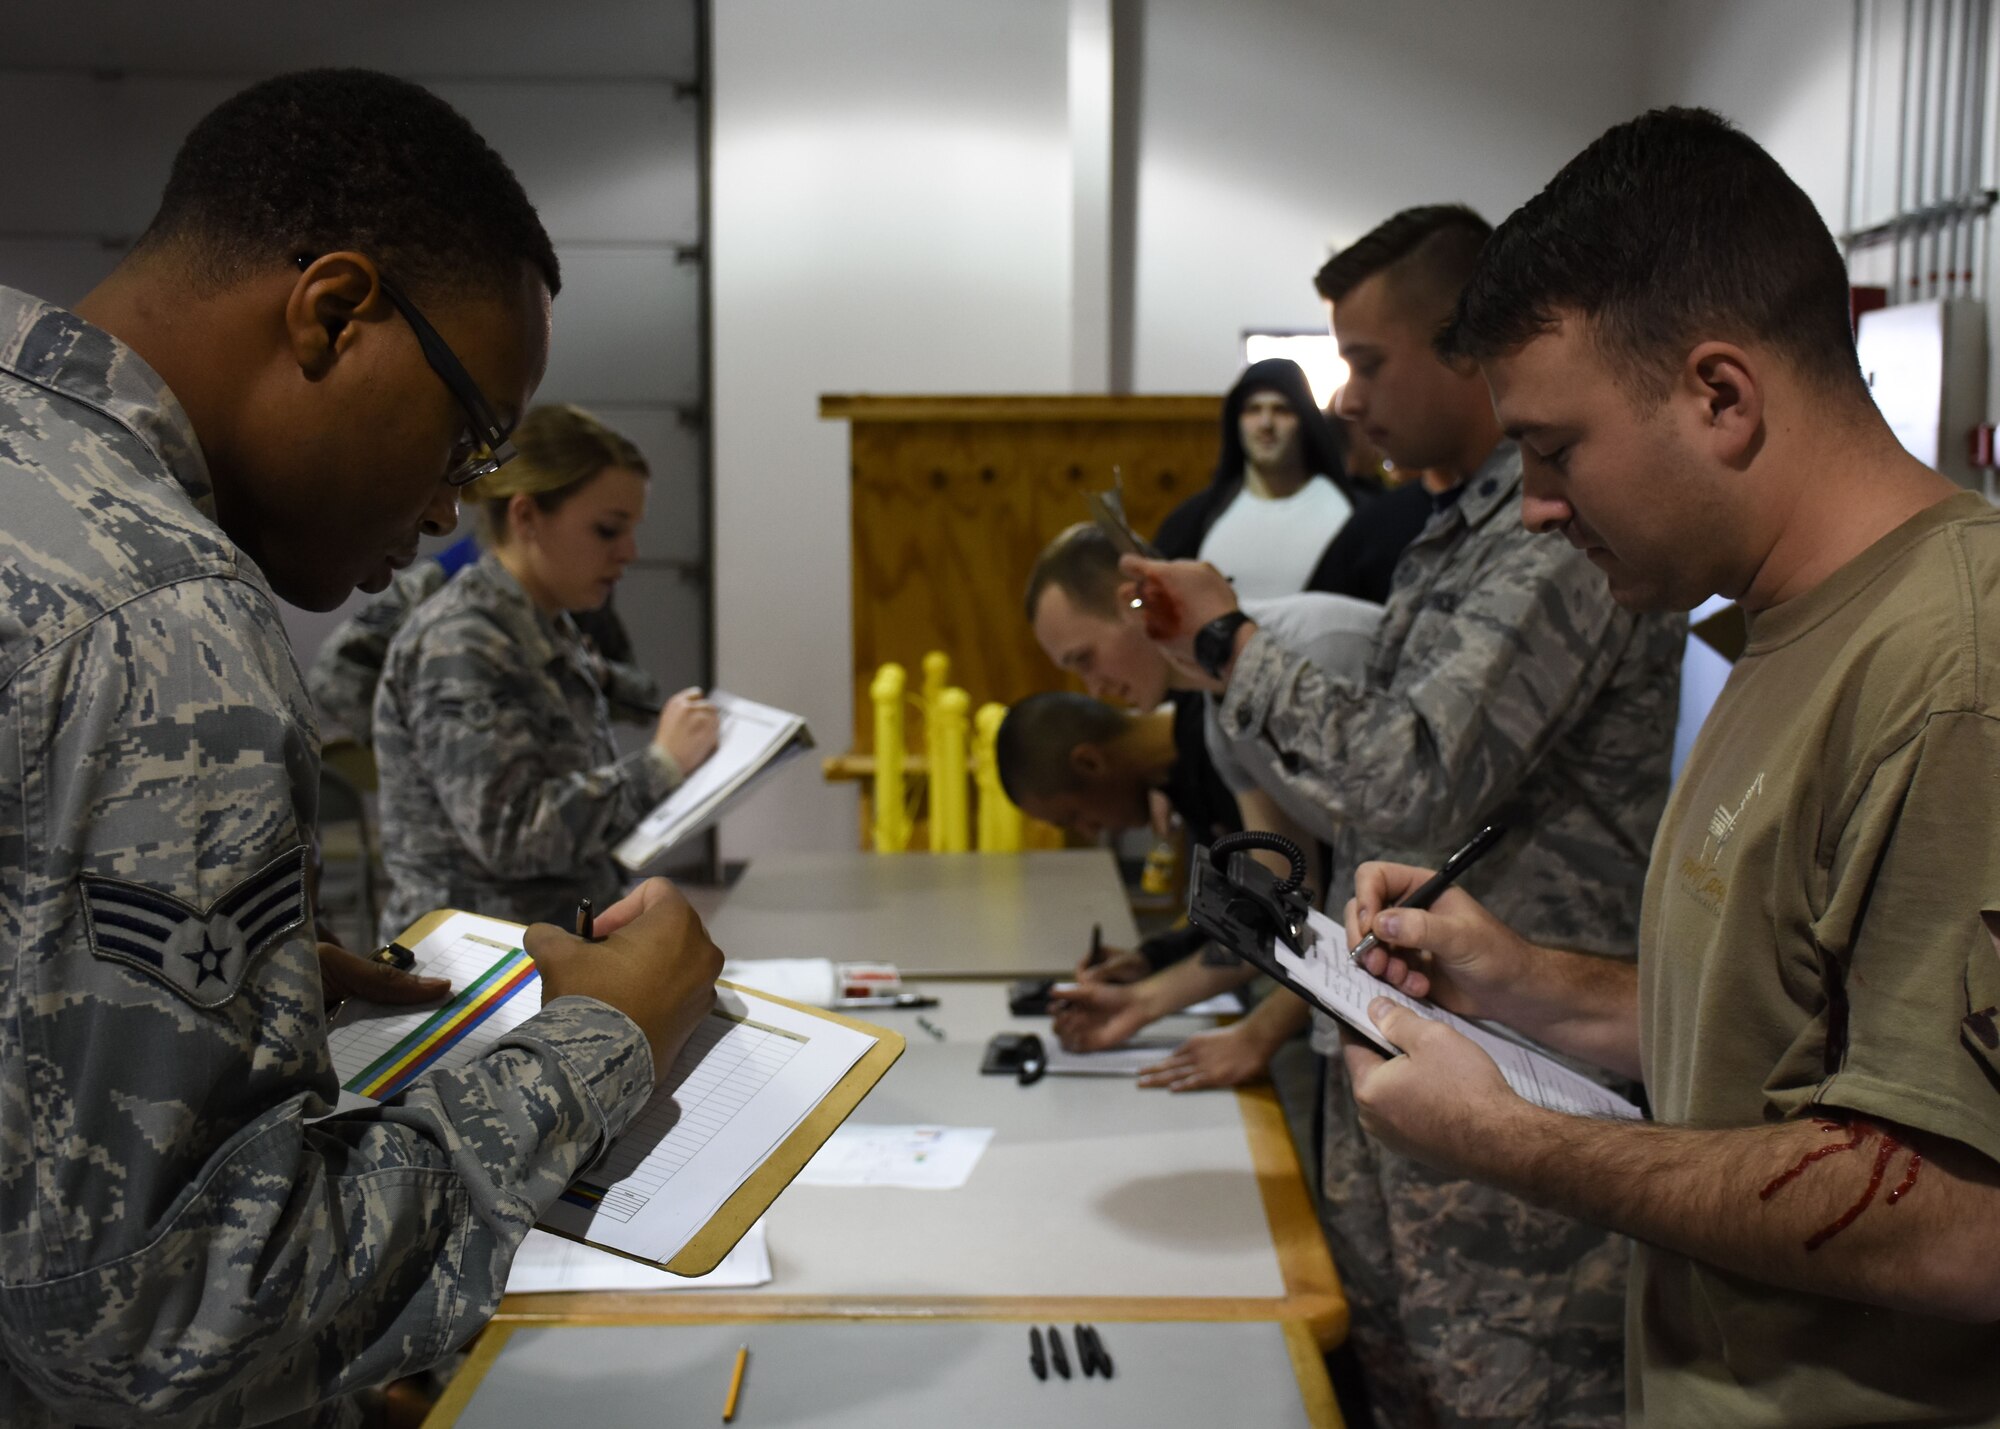 Members of the patient administration team and volunteers simulating flu symptoms complete screening forms during a total force point of distribution (POD) exercise at Whiteman Air Force Base, Mo., Dec. 2, 2017.